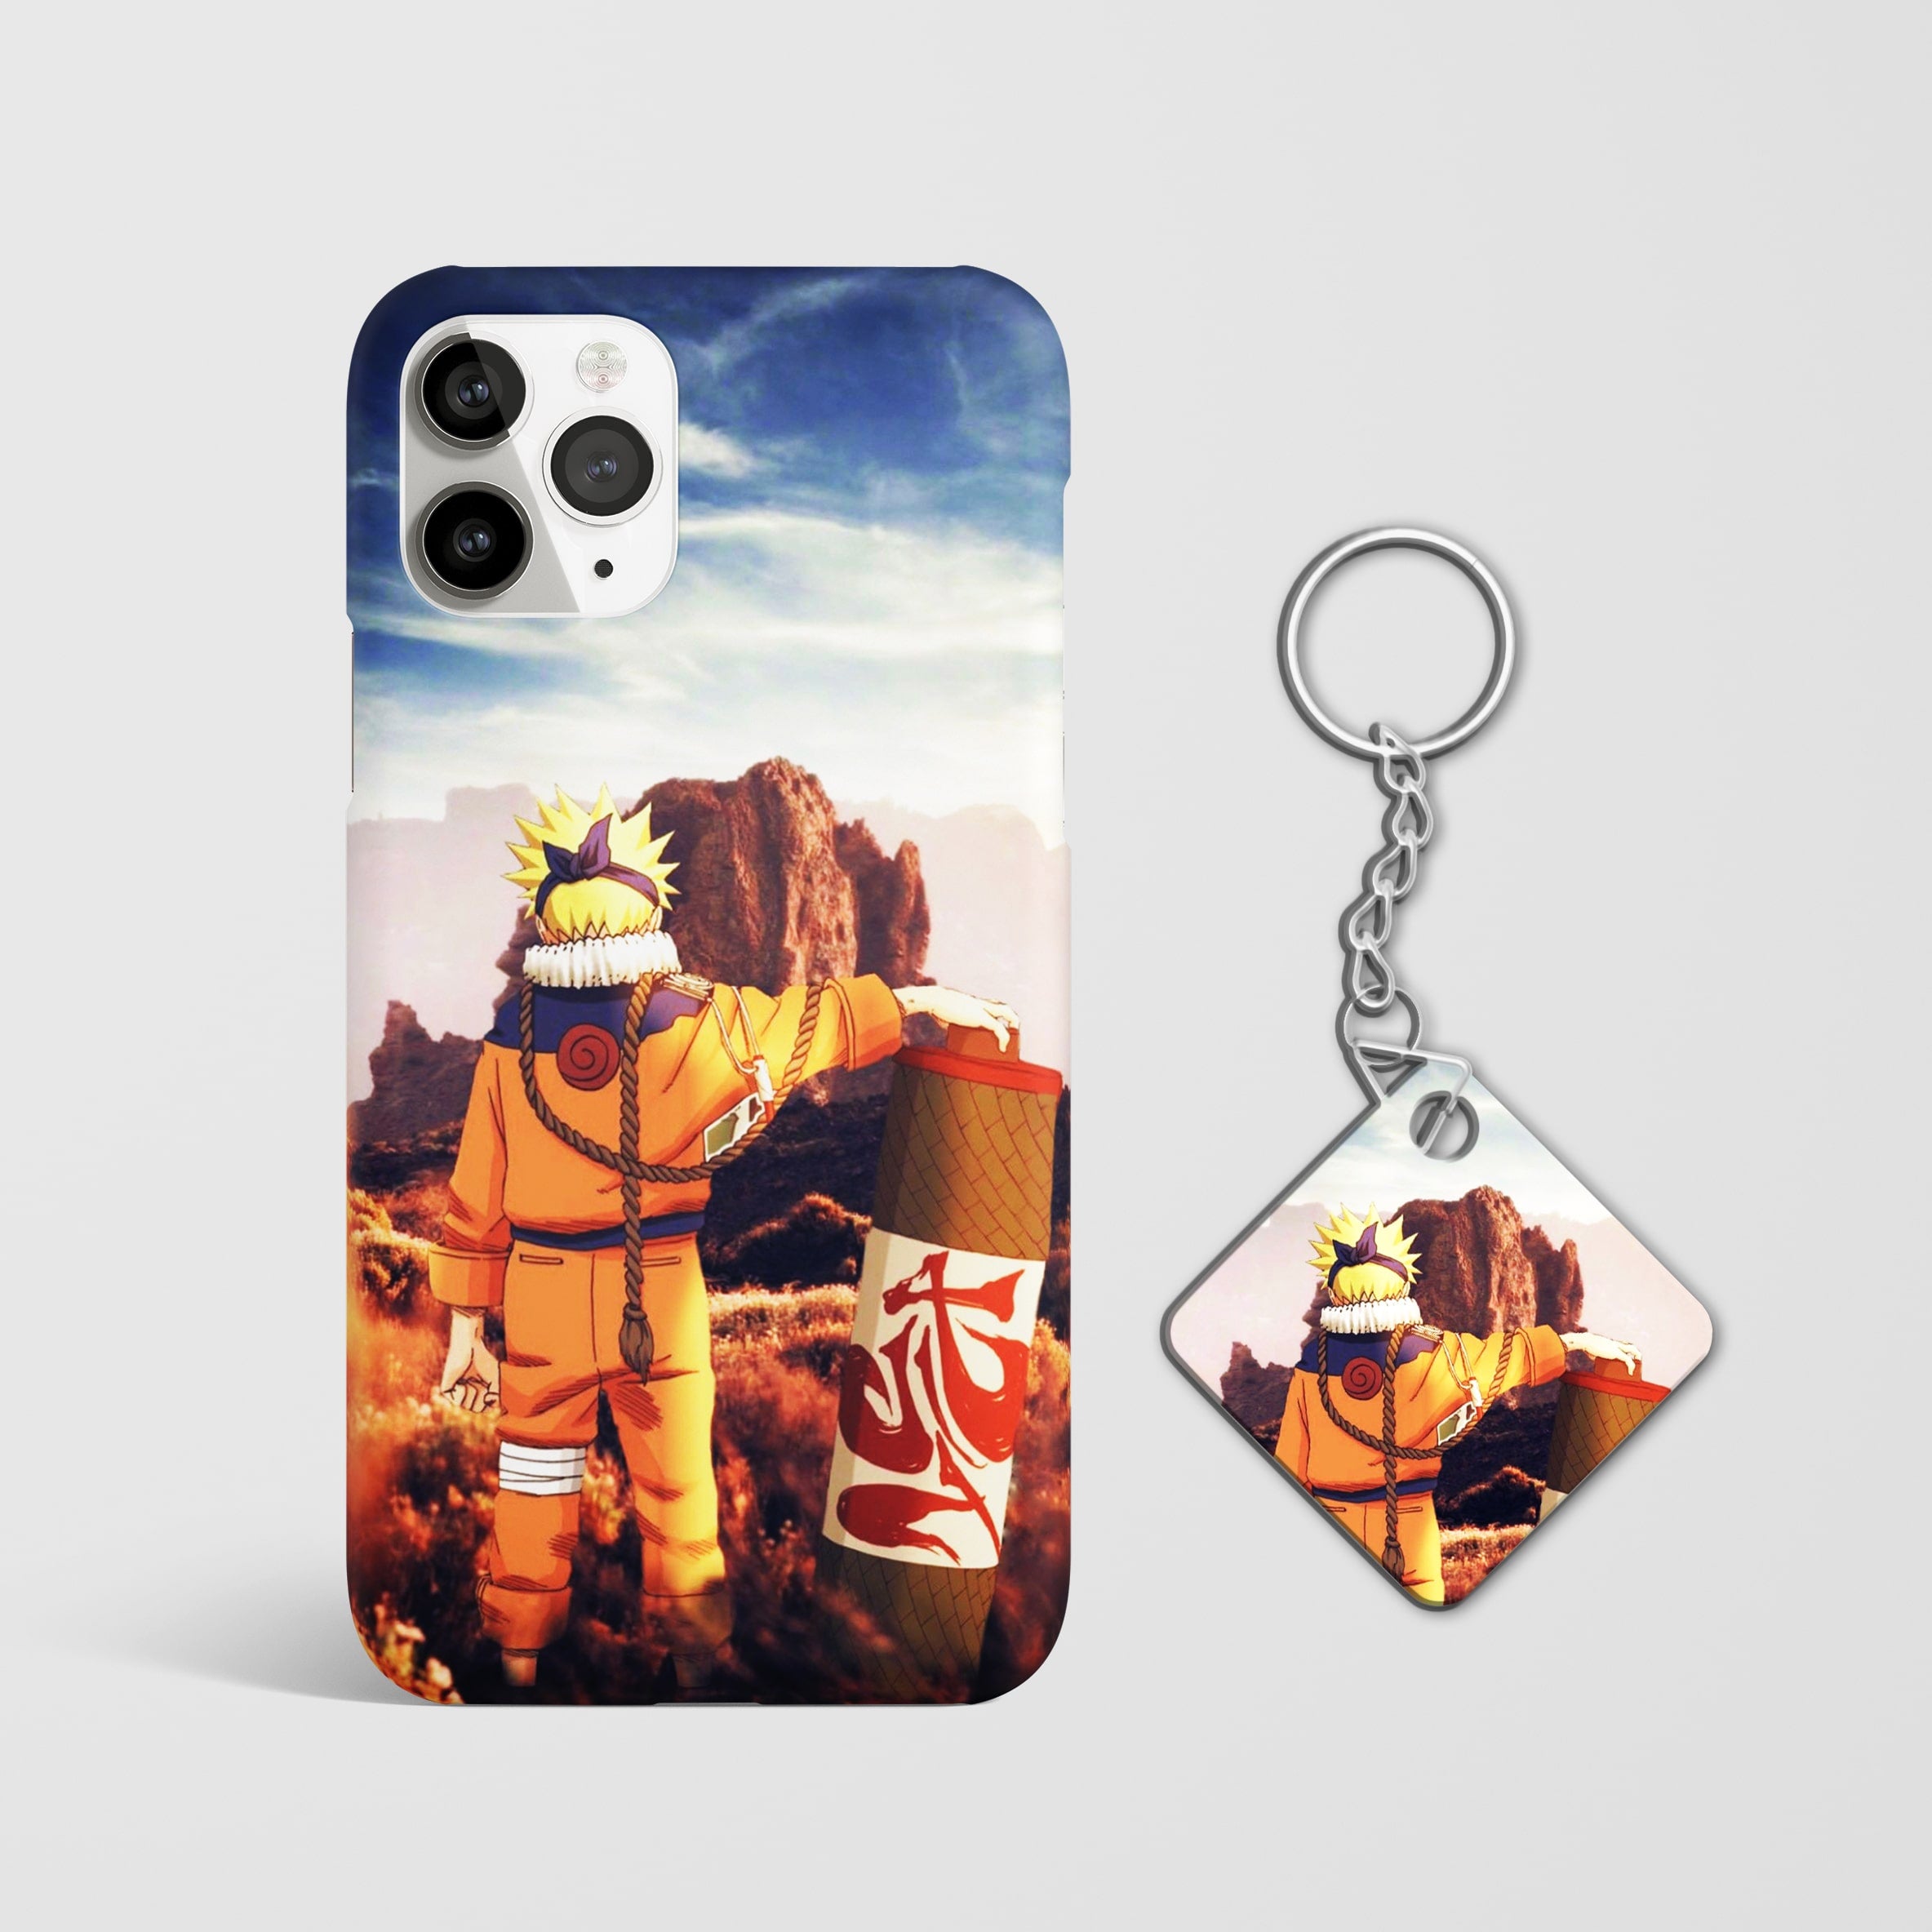 Naruto Scroll Phone Cover with Keychain